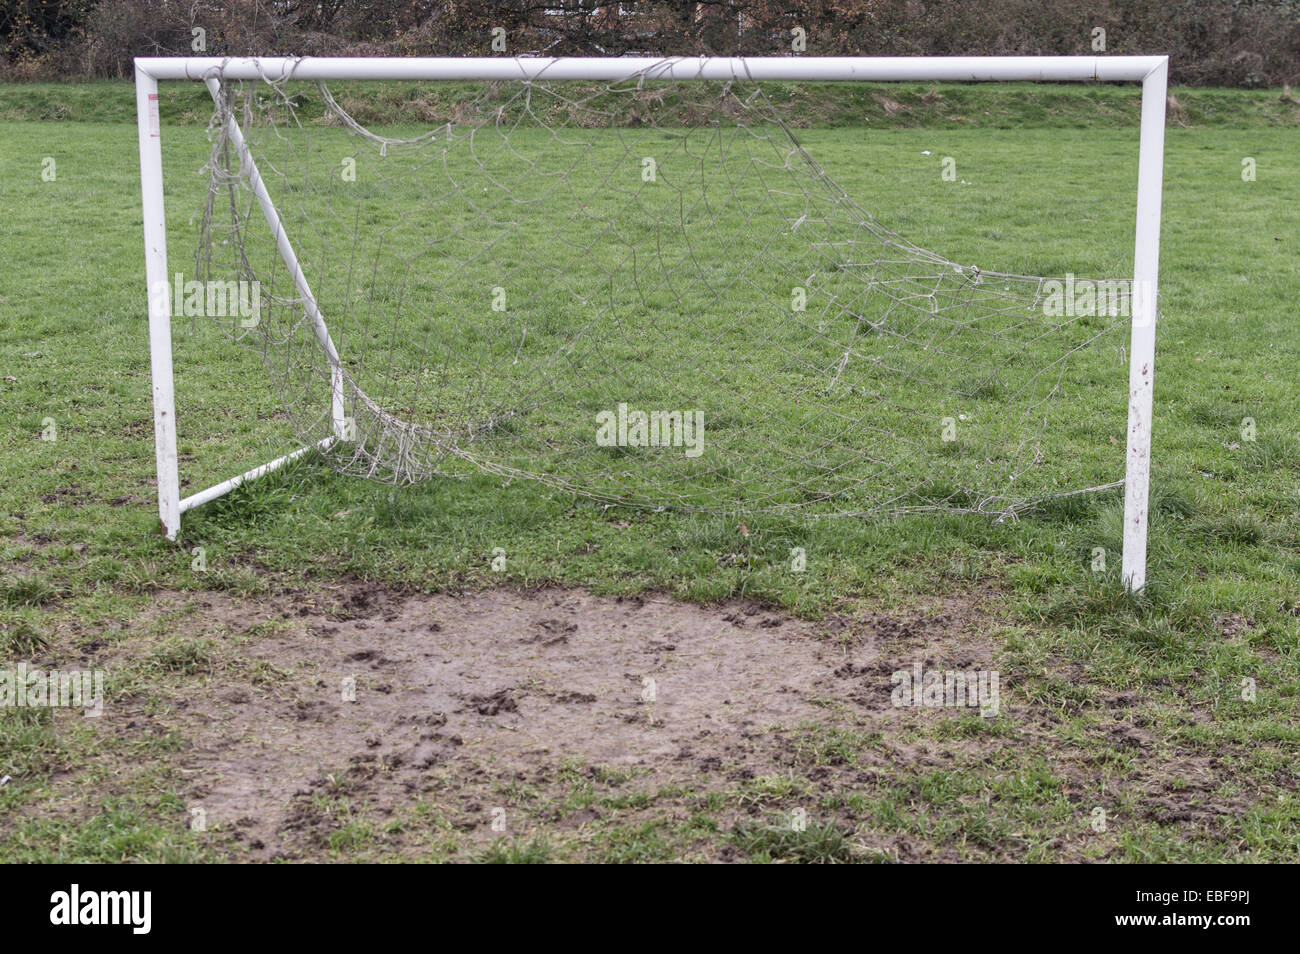 An empty five-a-side football goal with a net, on a muddy park field Stock Photo